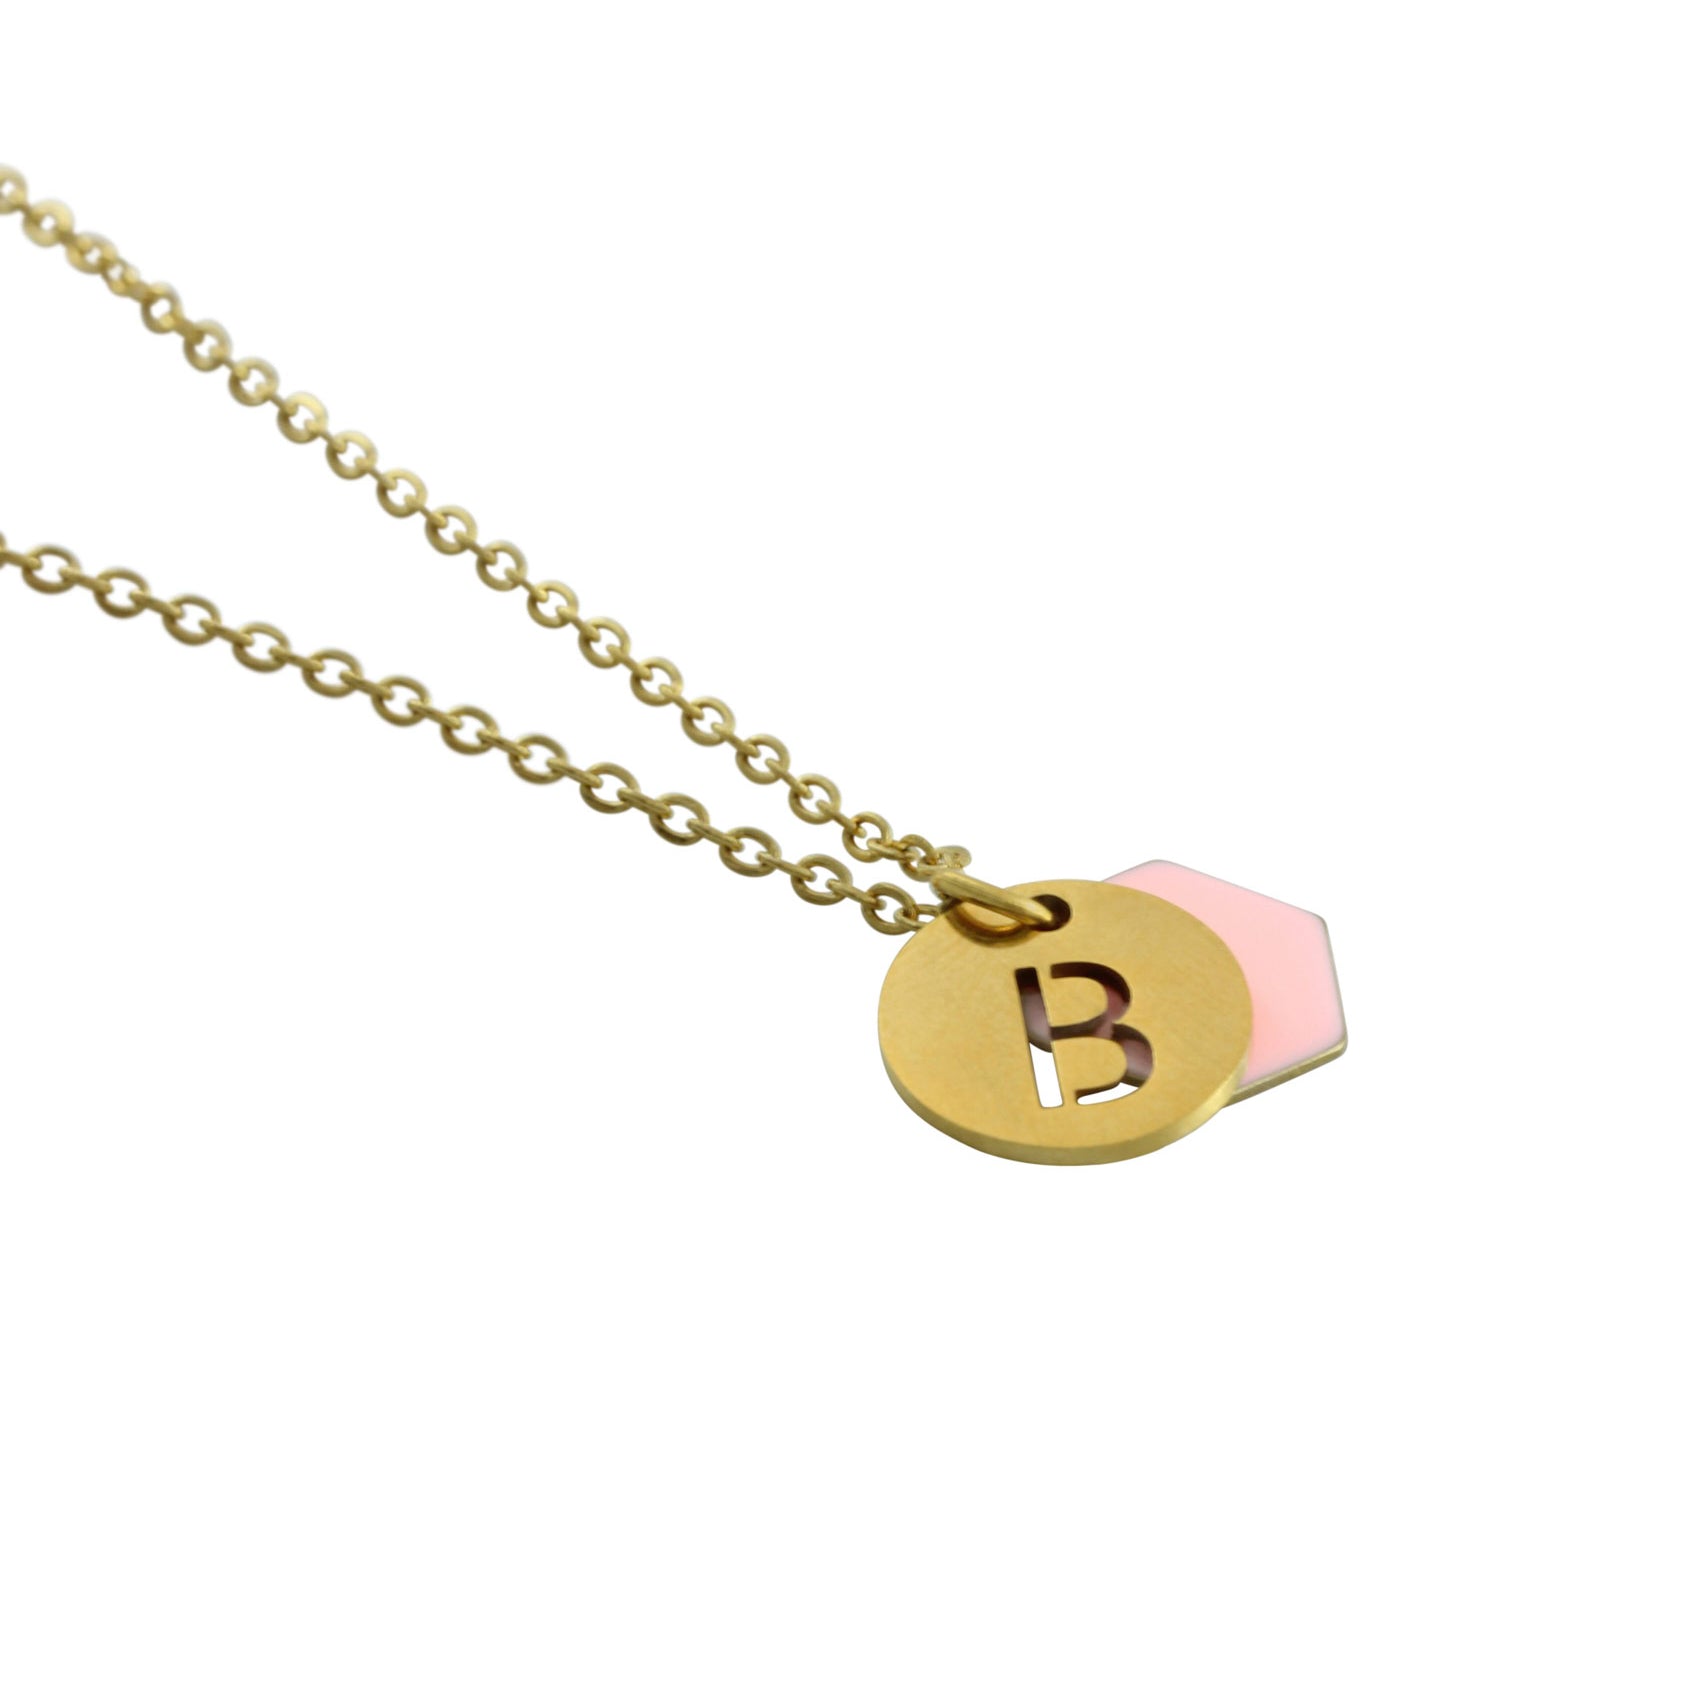 "Le Délice" Waterproof "Imperméable” Personalized Initial Gold Necklace with Pink Enamel Charm